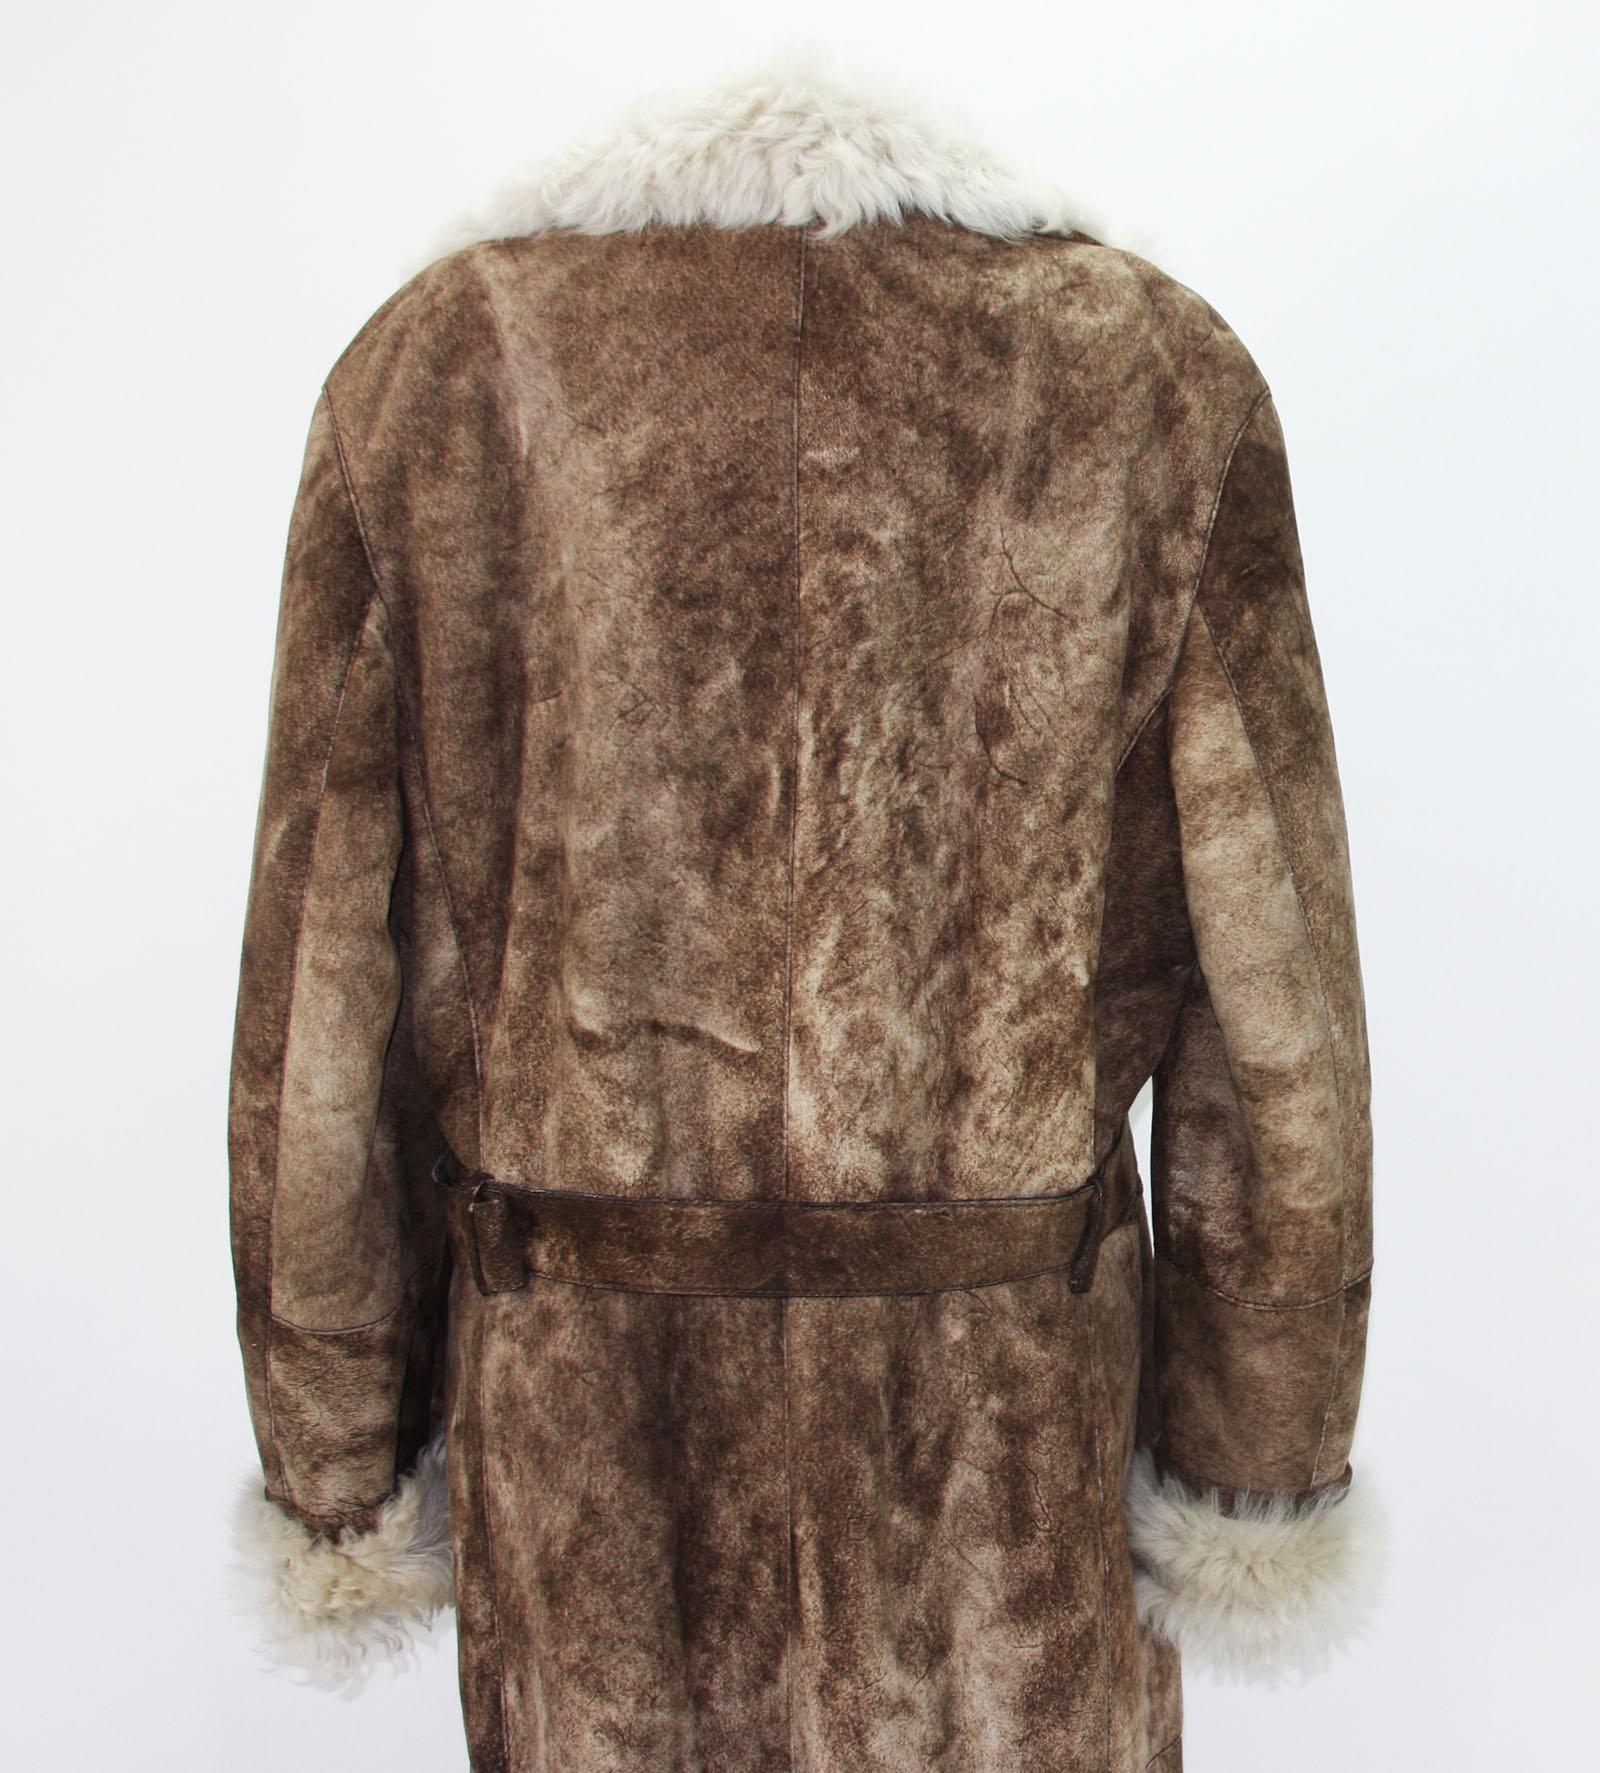 Tom Ford for Gucci Men's Brown Shearling Suede Long Winter Coat It.54 - US 44 2